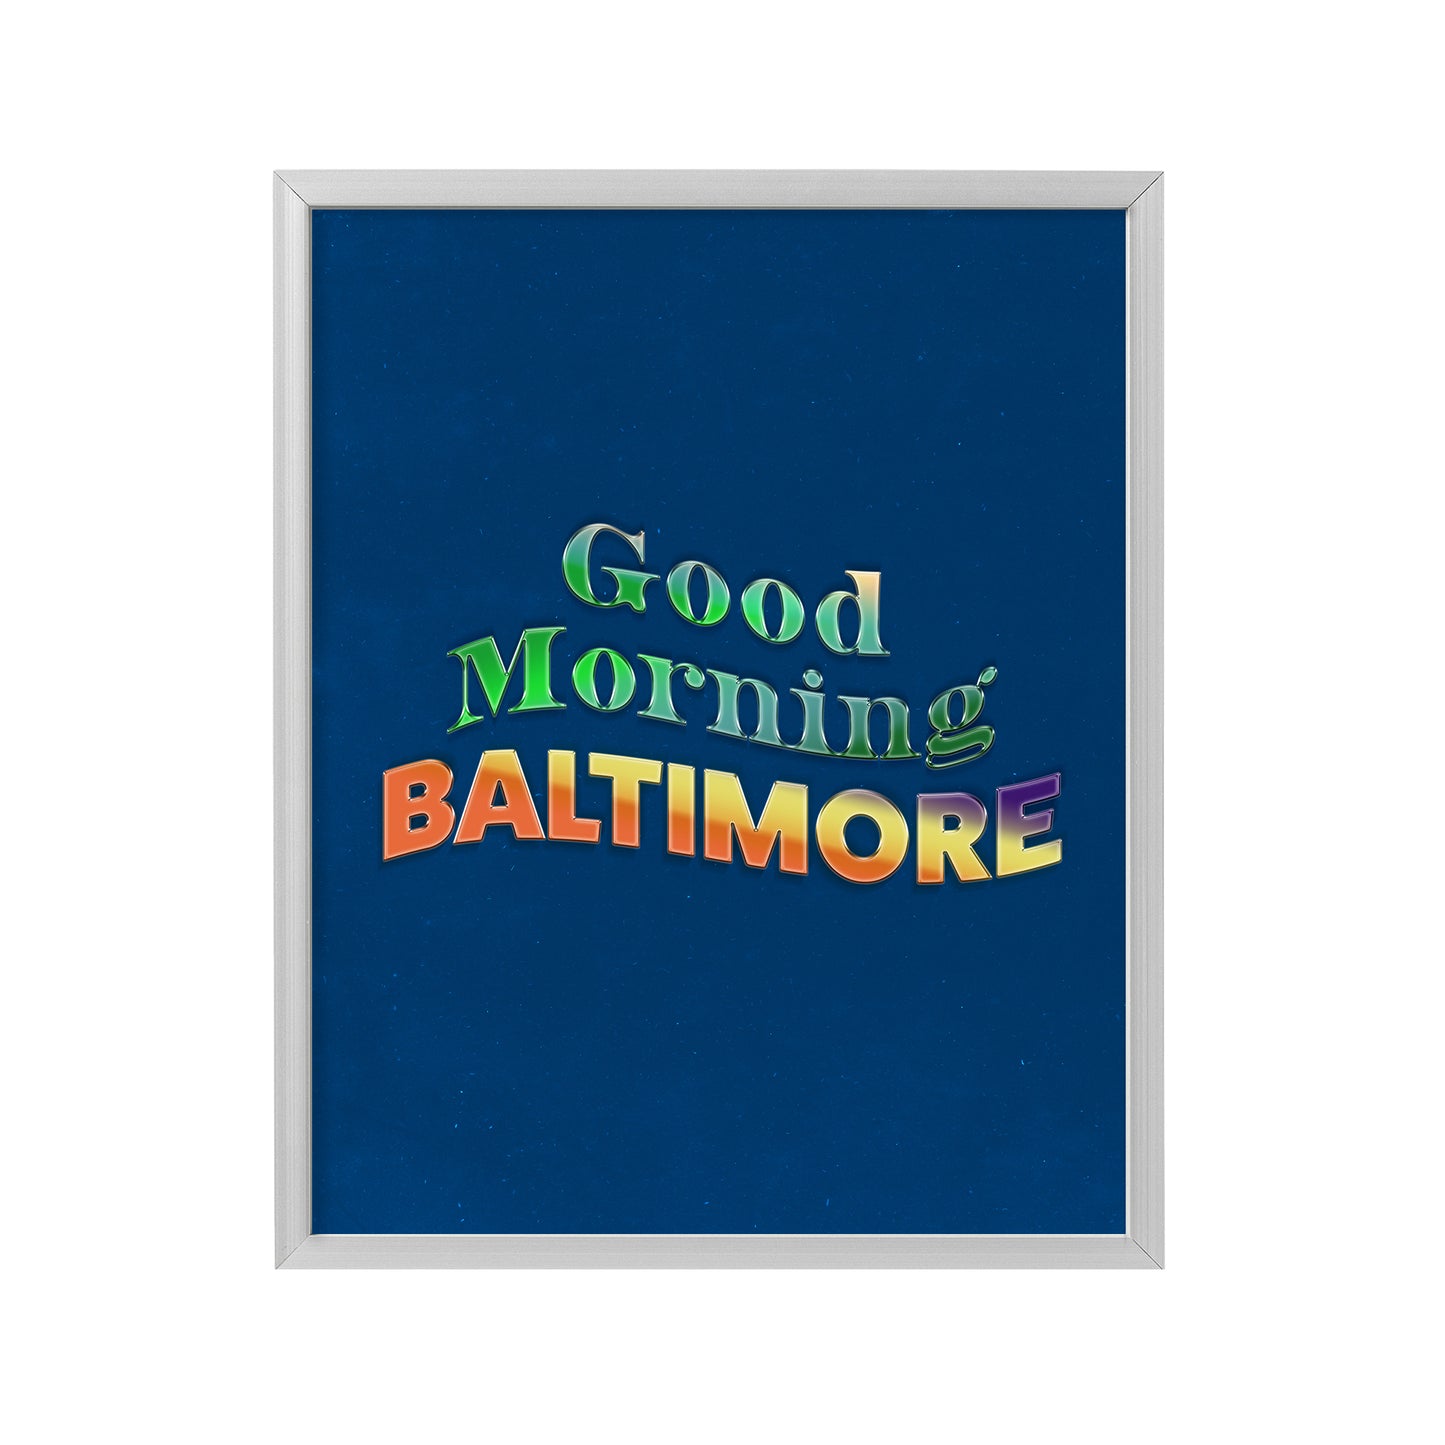 Good Morning Baltimore 11x14” art print from Goods Made By Digitrillnana, Ashley Fletcher. Baltimore, Maryland, Blue, sunrise, typography. Black Woman Owned. Perfect for home decor, wall art, art prints, and more!